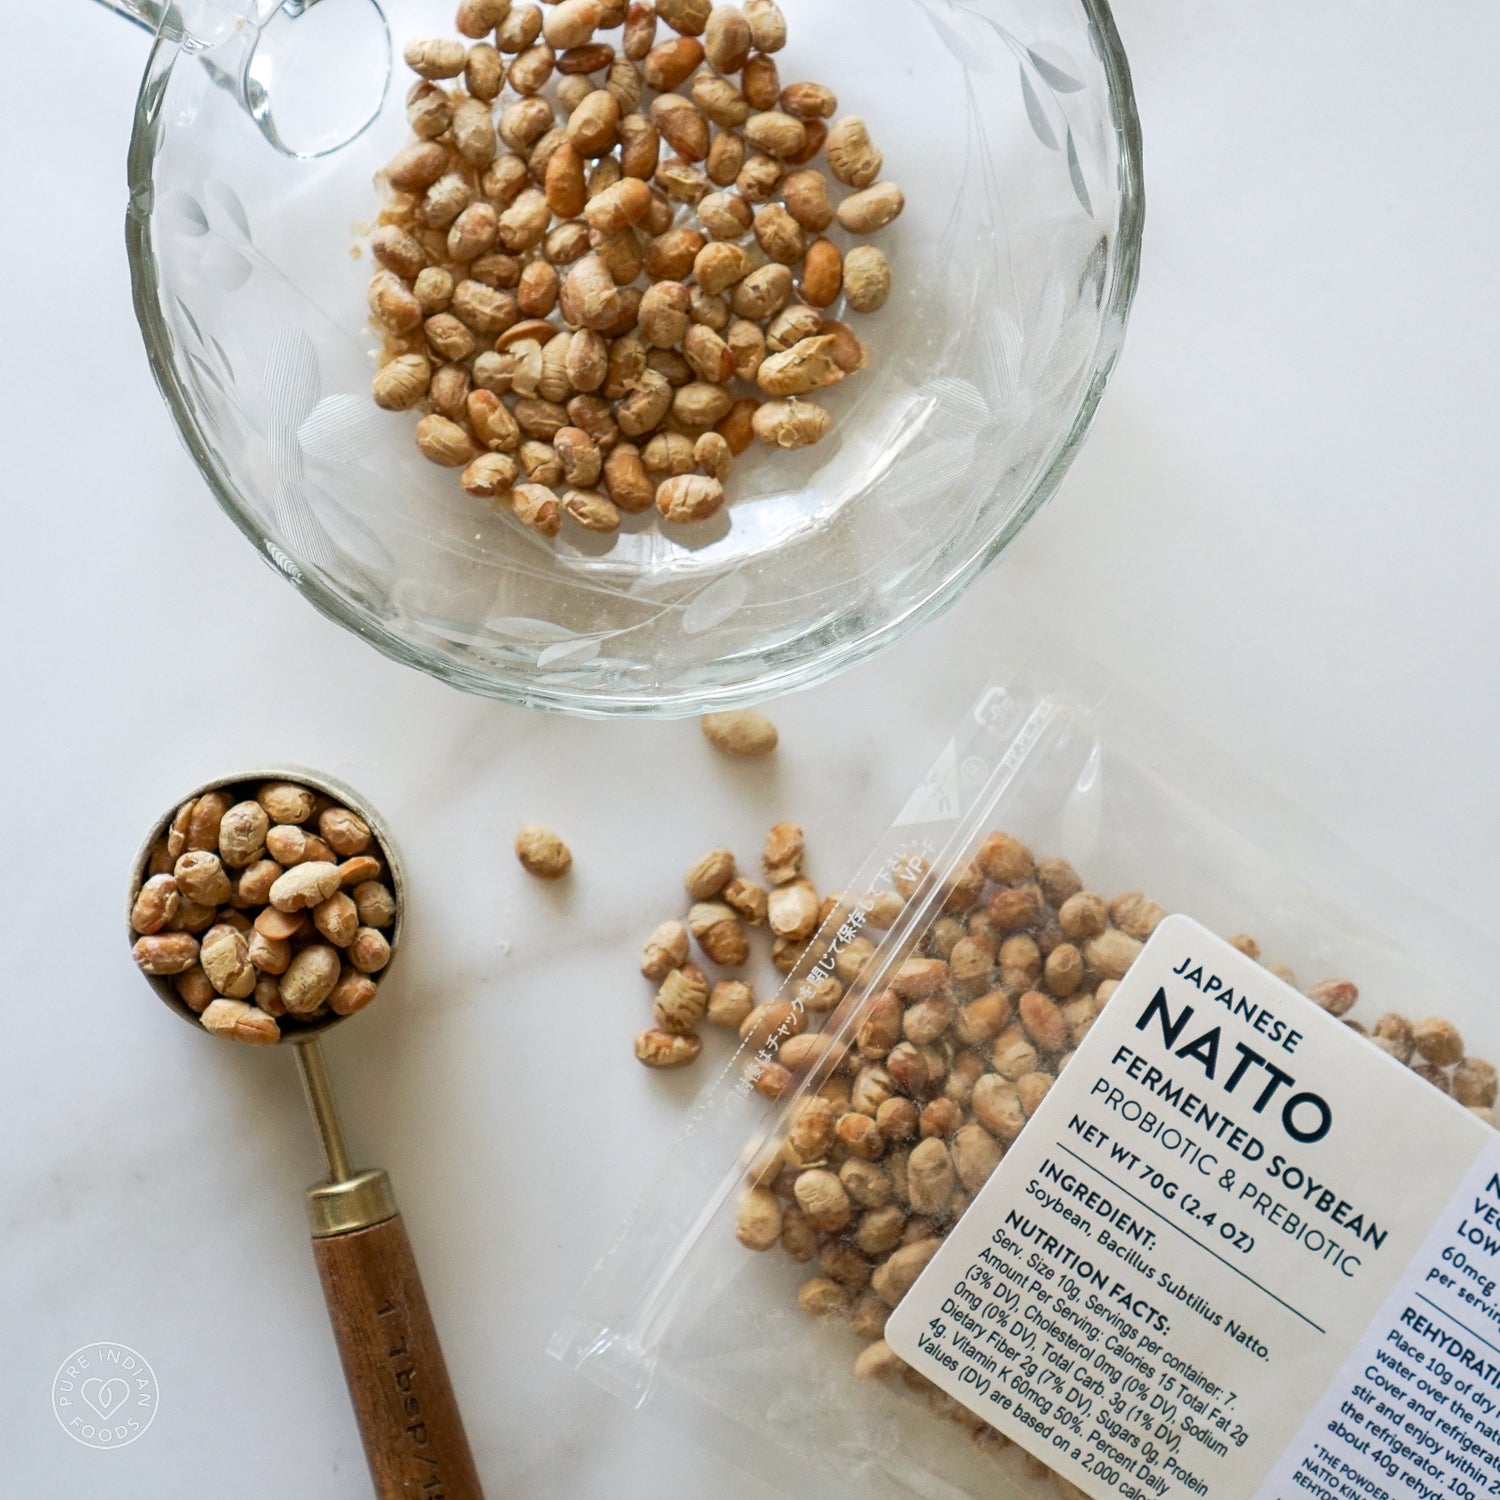 A bag of Pure Indian Foods freeze-dried natto, open with some of the non-gmo natto spilling out. Next to it is a heaping spoonful of the dried natto and a glass bowl filled with even more of the traditionally fermented soybeans.